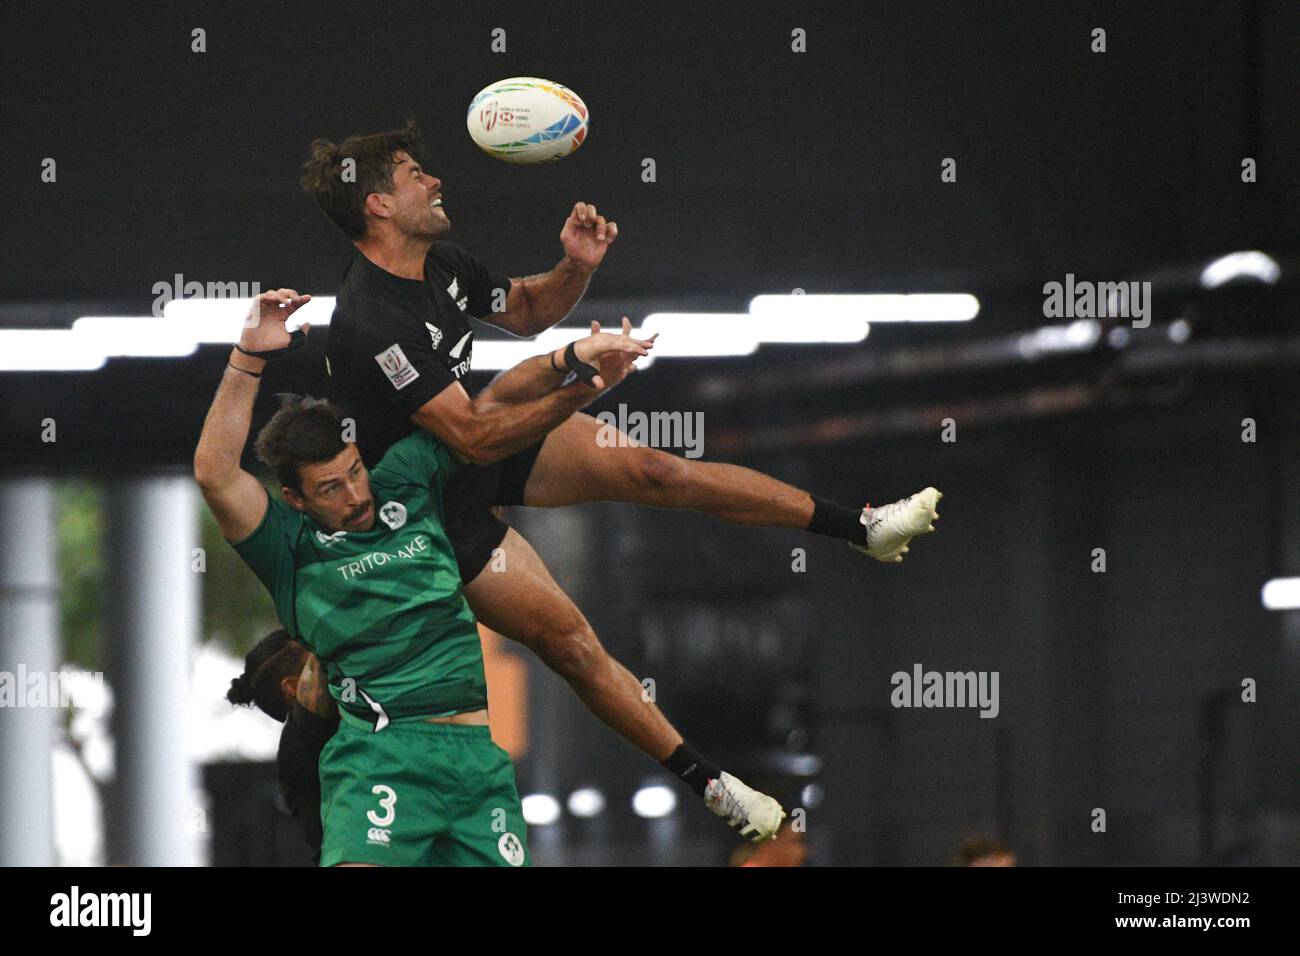 Singapore. 10th Apr, 2022. Andrew Knewstubb (top) of New Zealand vies with Harry McNulty of Ireland during the semifinal at the HSBC World Rugby Sevens Singapore stop, held in the National Stadium on April 10, 2022. Credit: Then Chih Wey/Xinhua/Alamy Live News Stock Photo